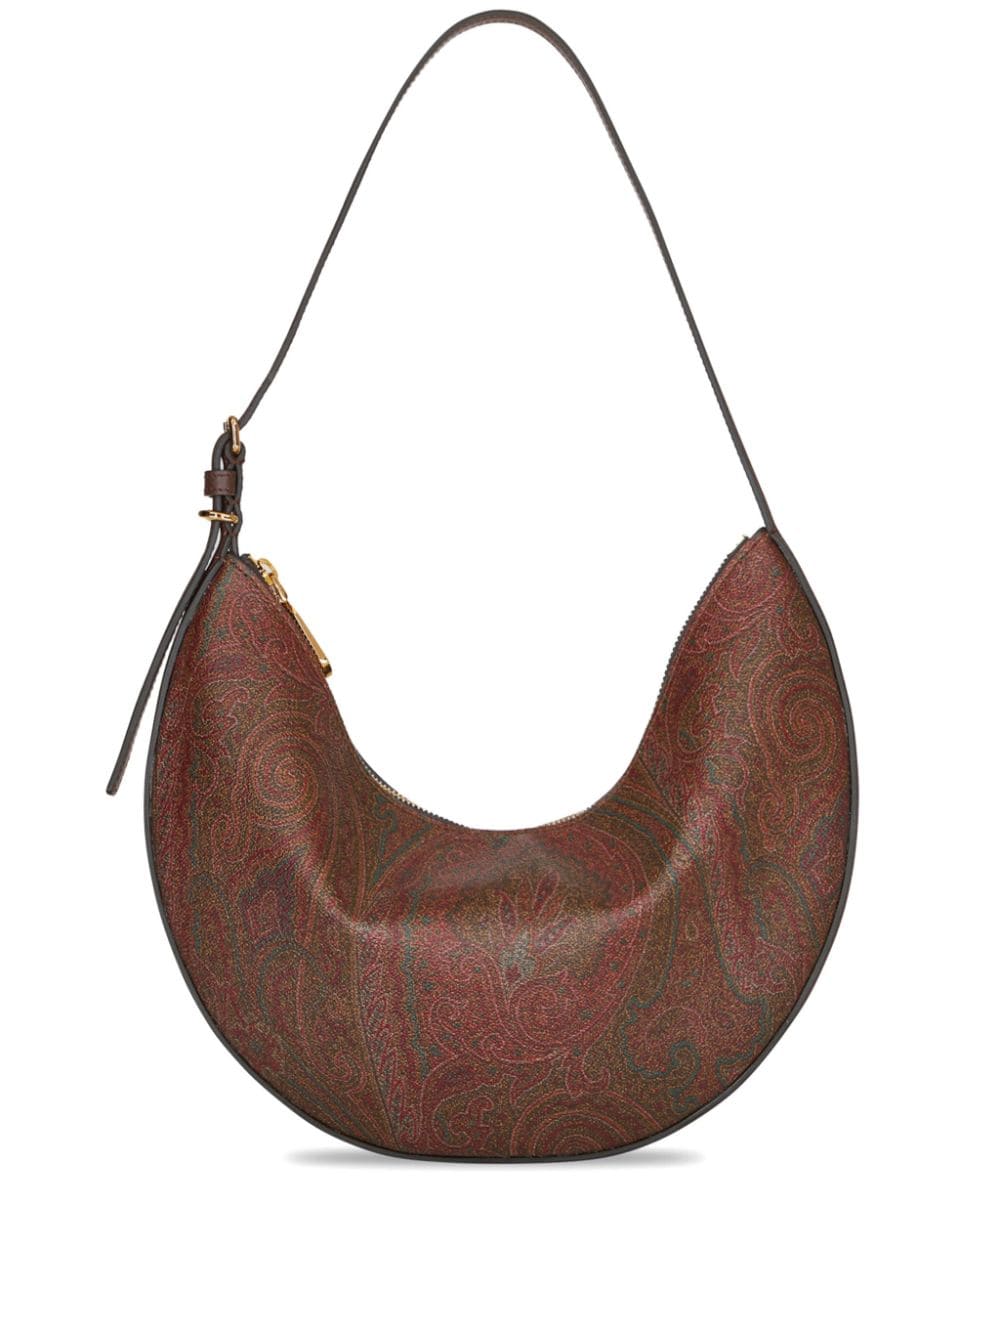 ETRO Brown Paisley Hobo Bag for Women with Leather Trim and Adjustable Handle